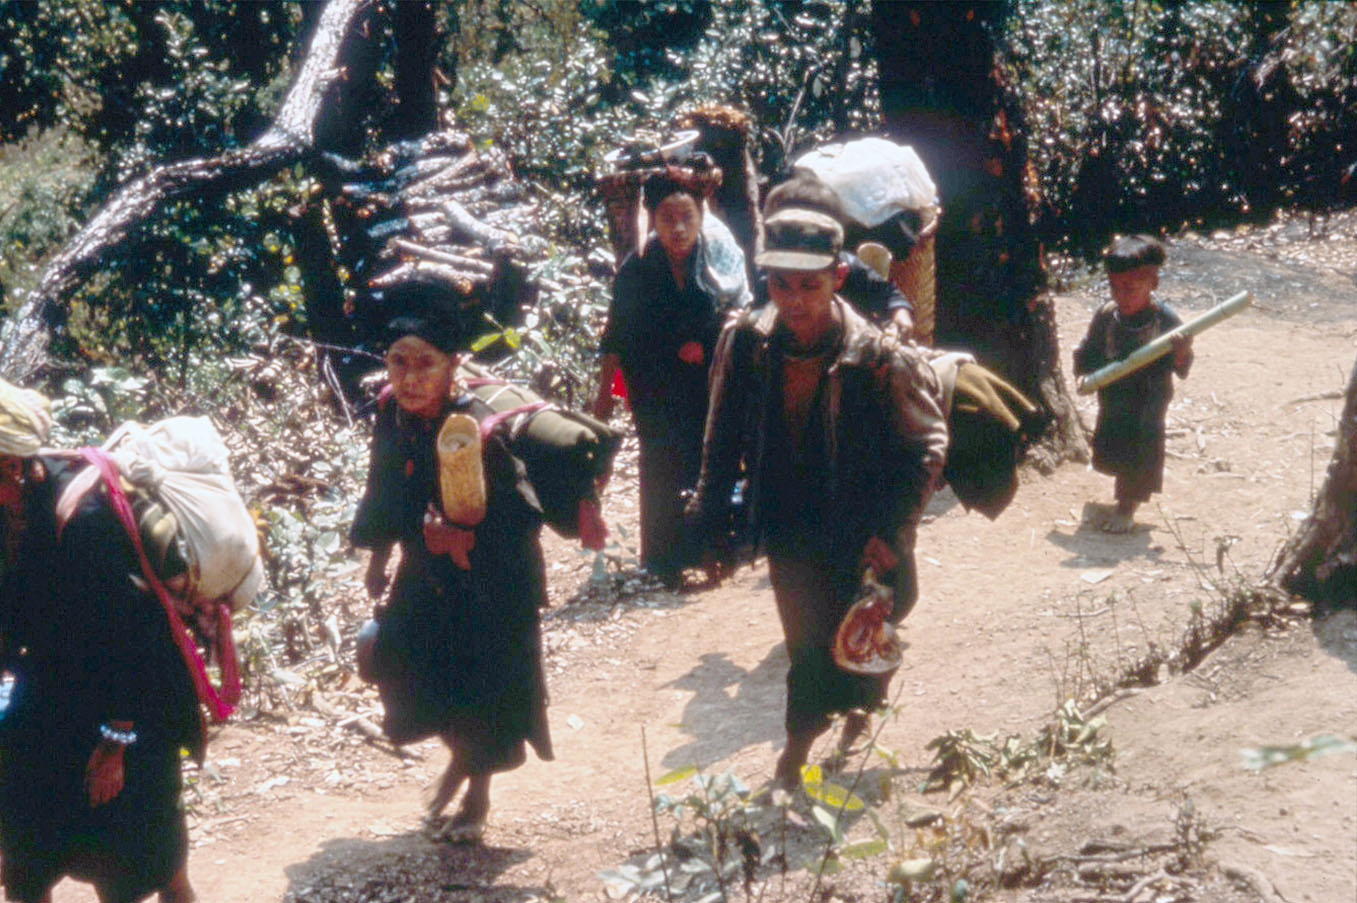 Hmong families living on the run